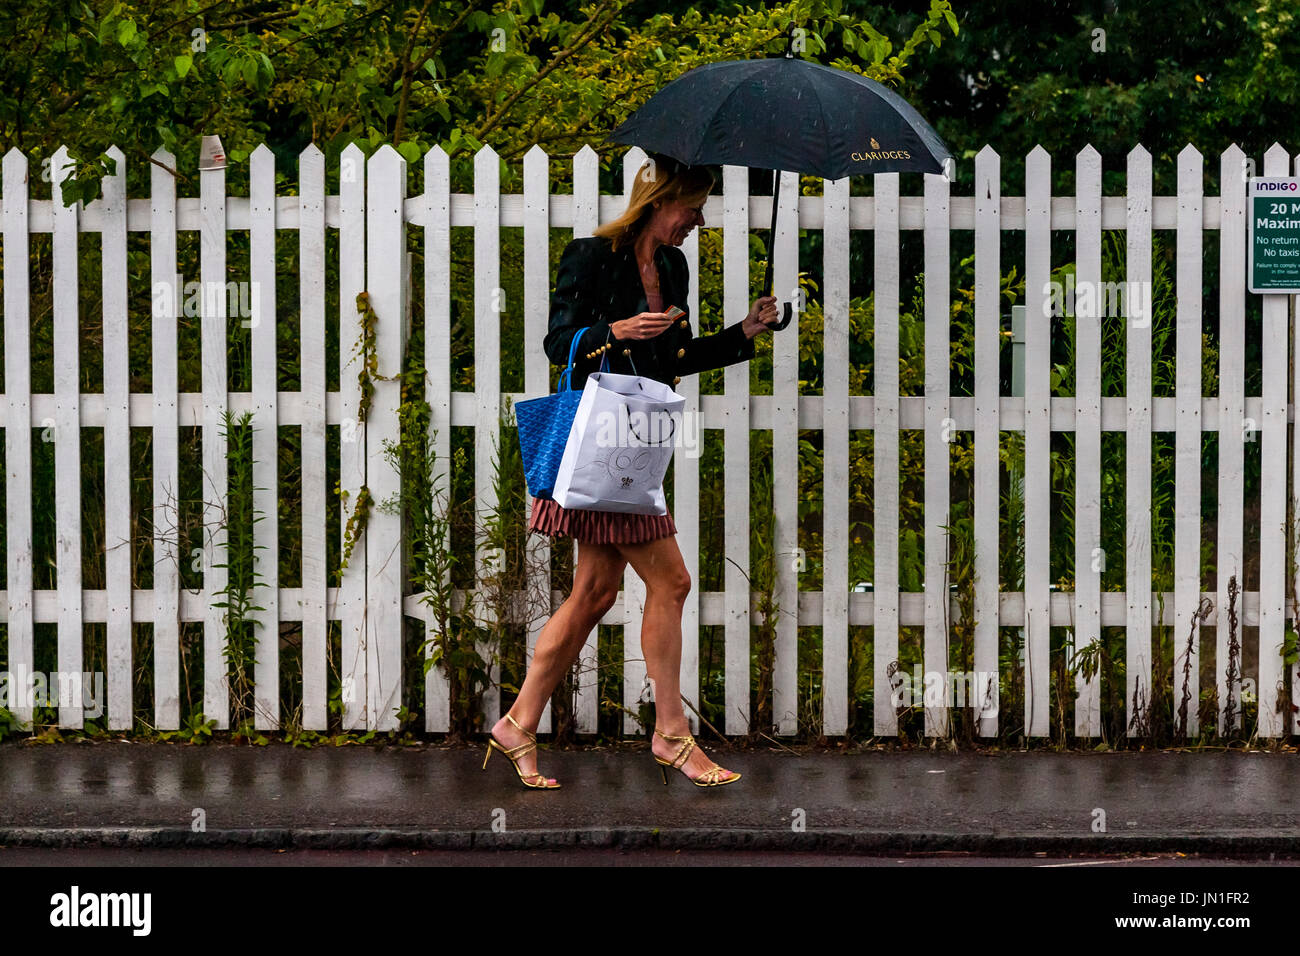 Lewes, UK. 29th July 2017. Opera fans arrive at Lewes train station in the rain en route to Glyndebourne Opera House for a performance of La clemenza di Tito, Lewes, East Sussex, UK.  Credit: Grant Rooney/Alamy Live News Stock Photo